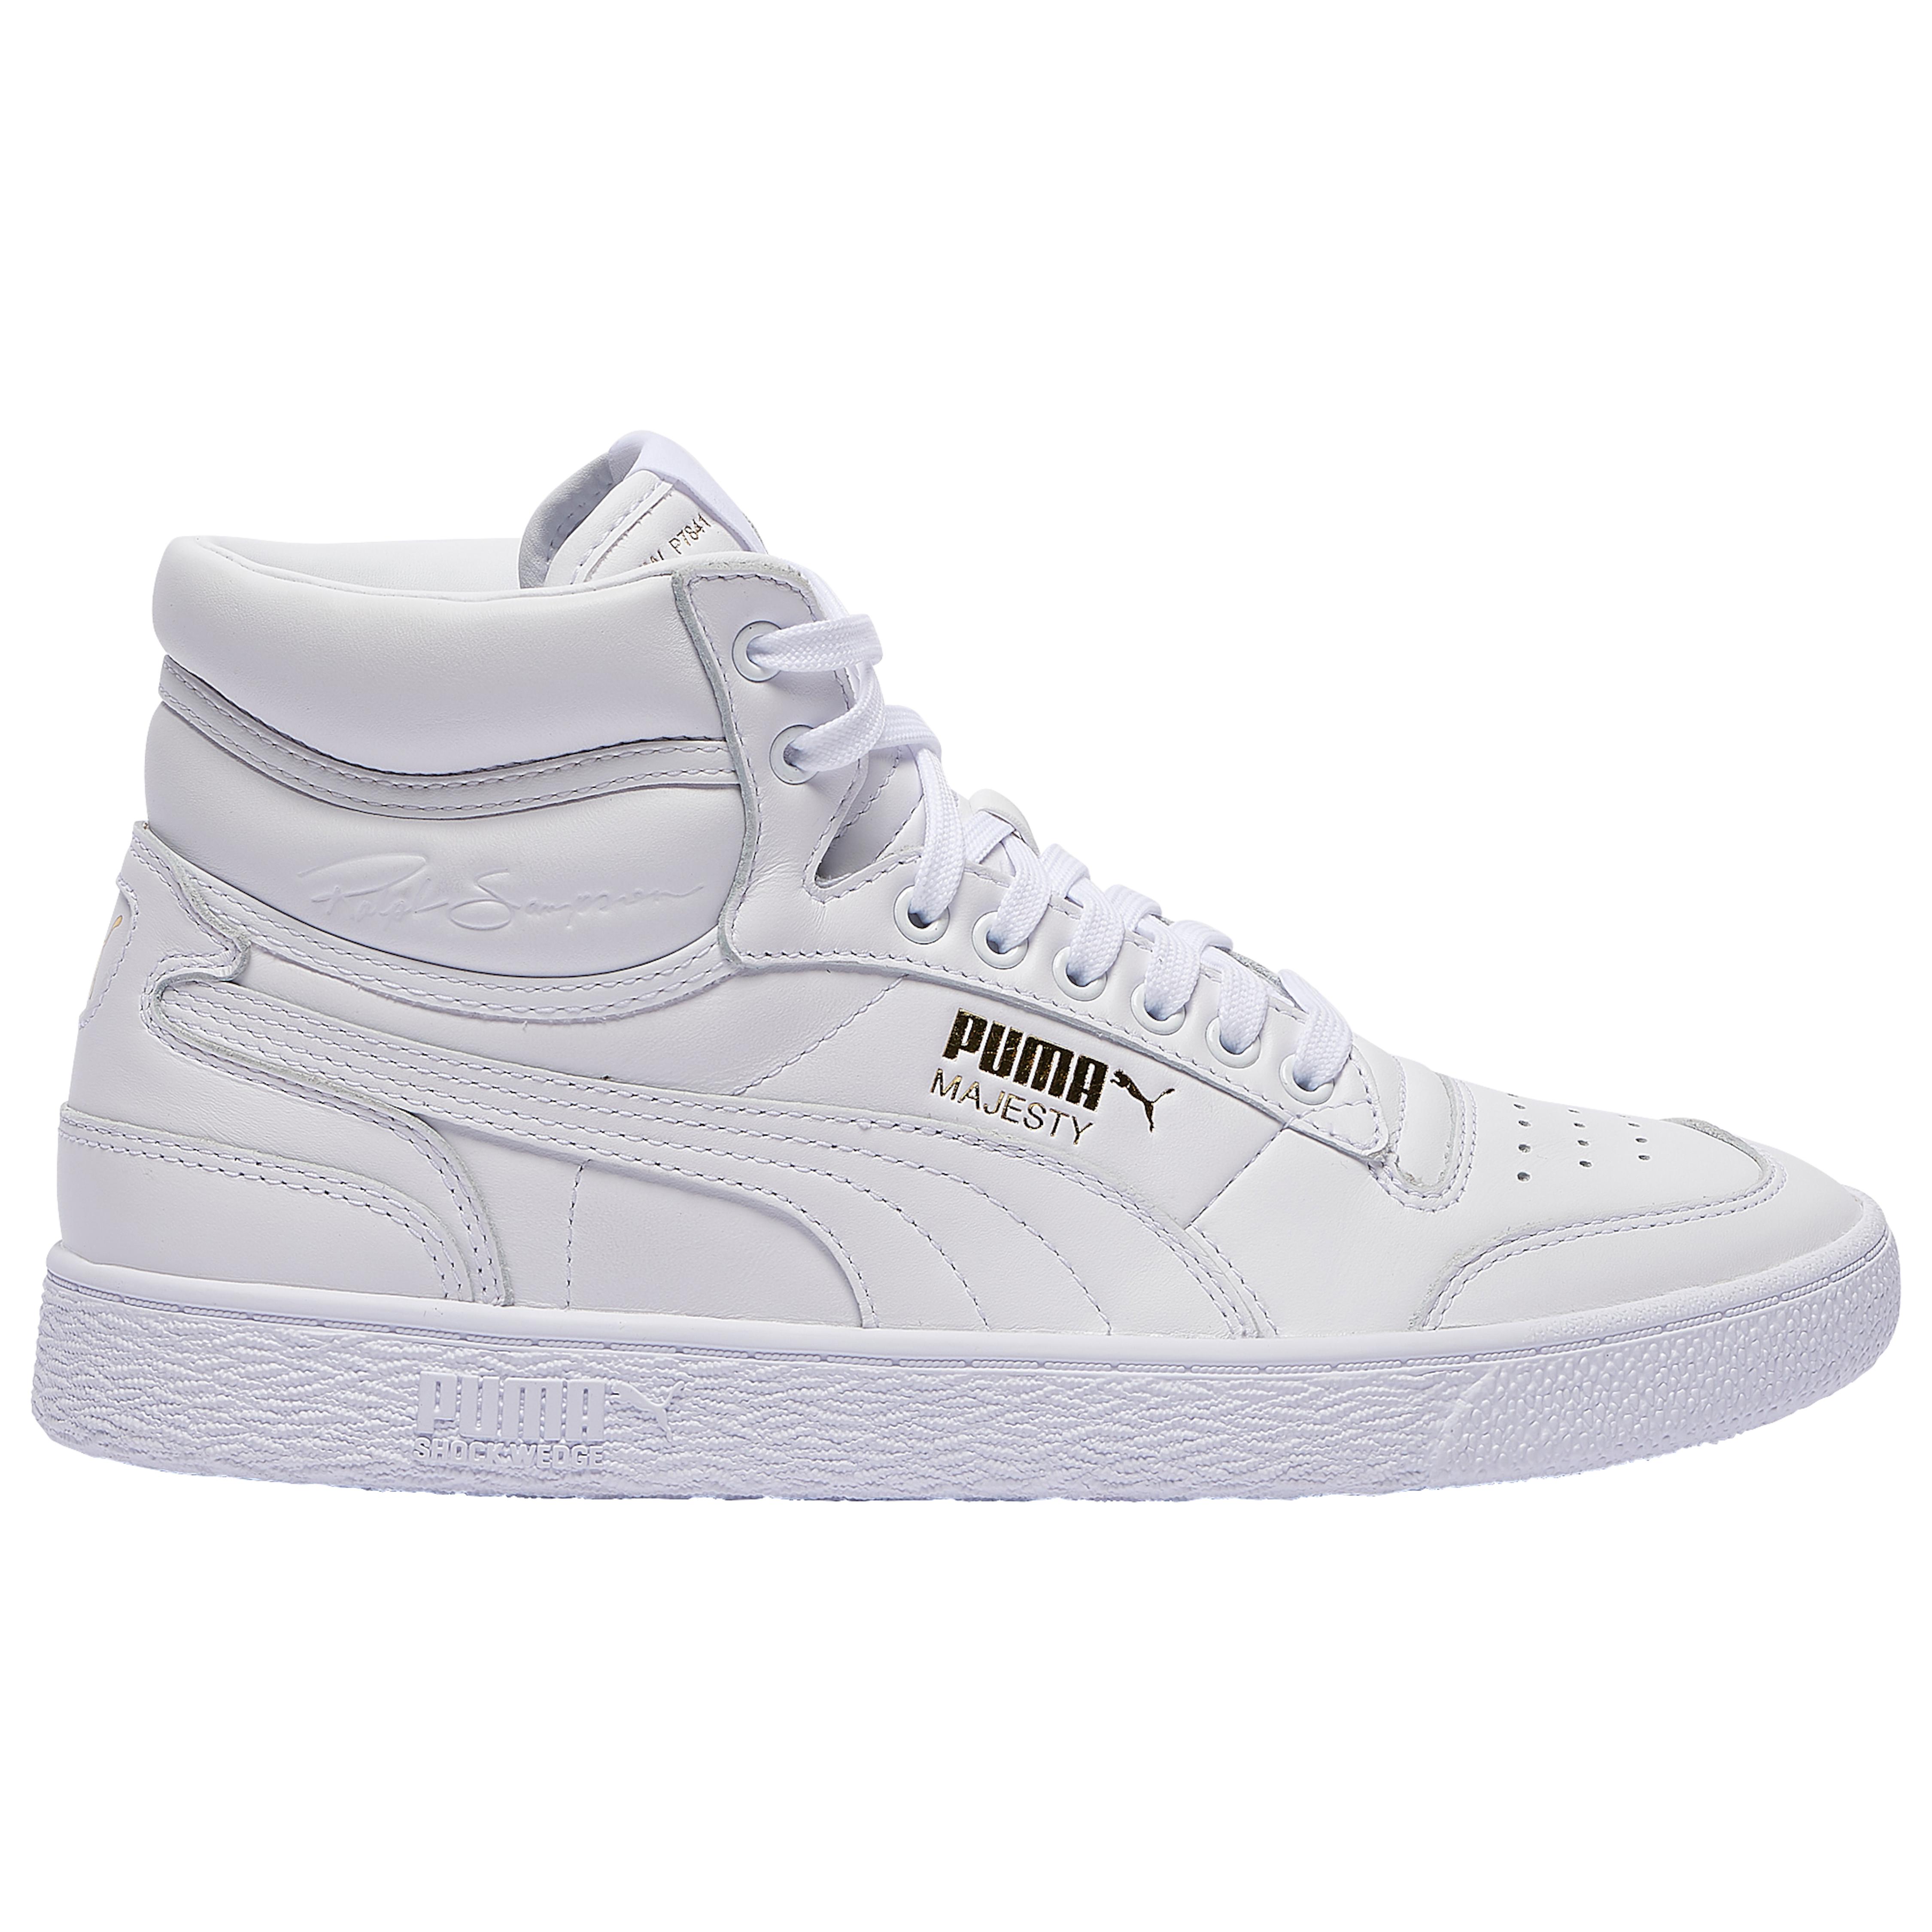 PUMA Leather Ralph Sampson Mid in White for Men - Save 12% - Lyst